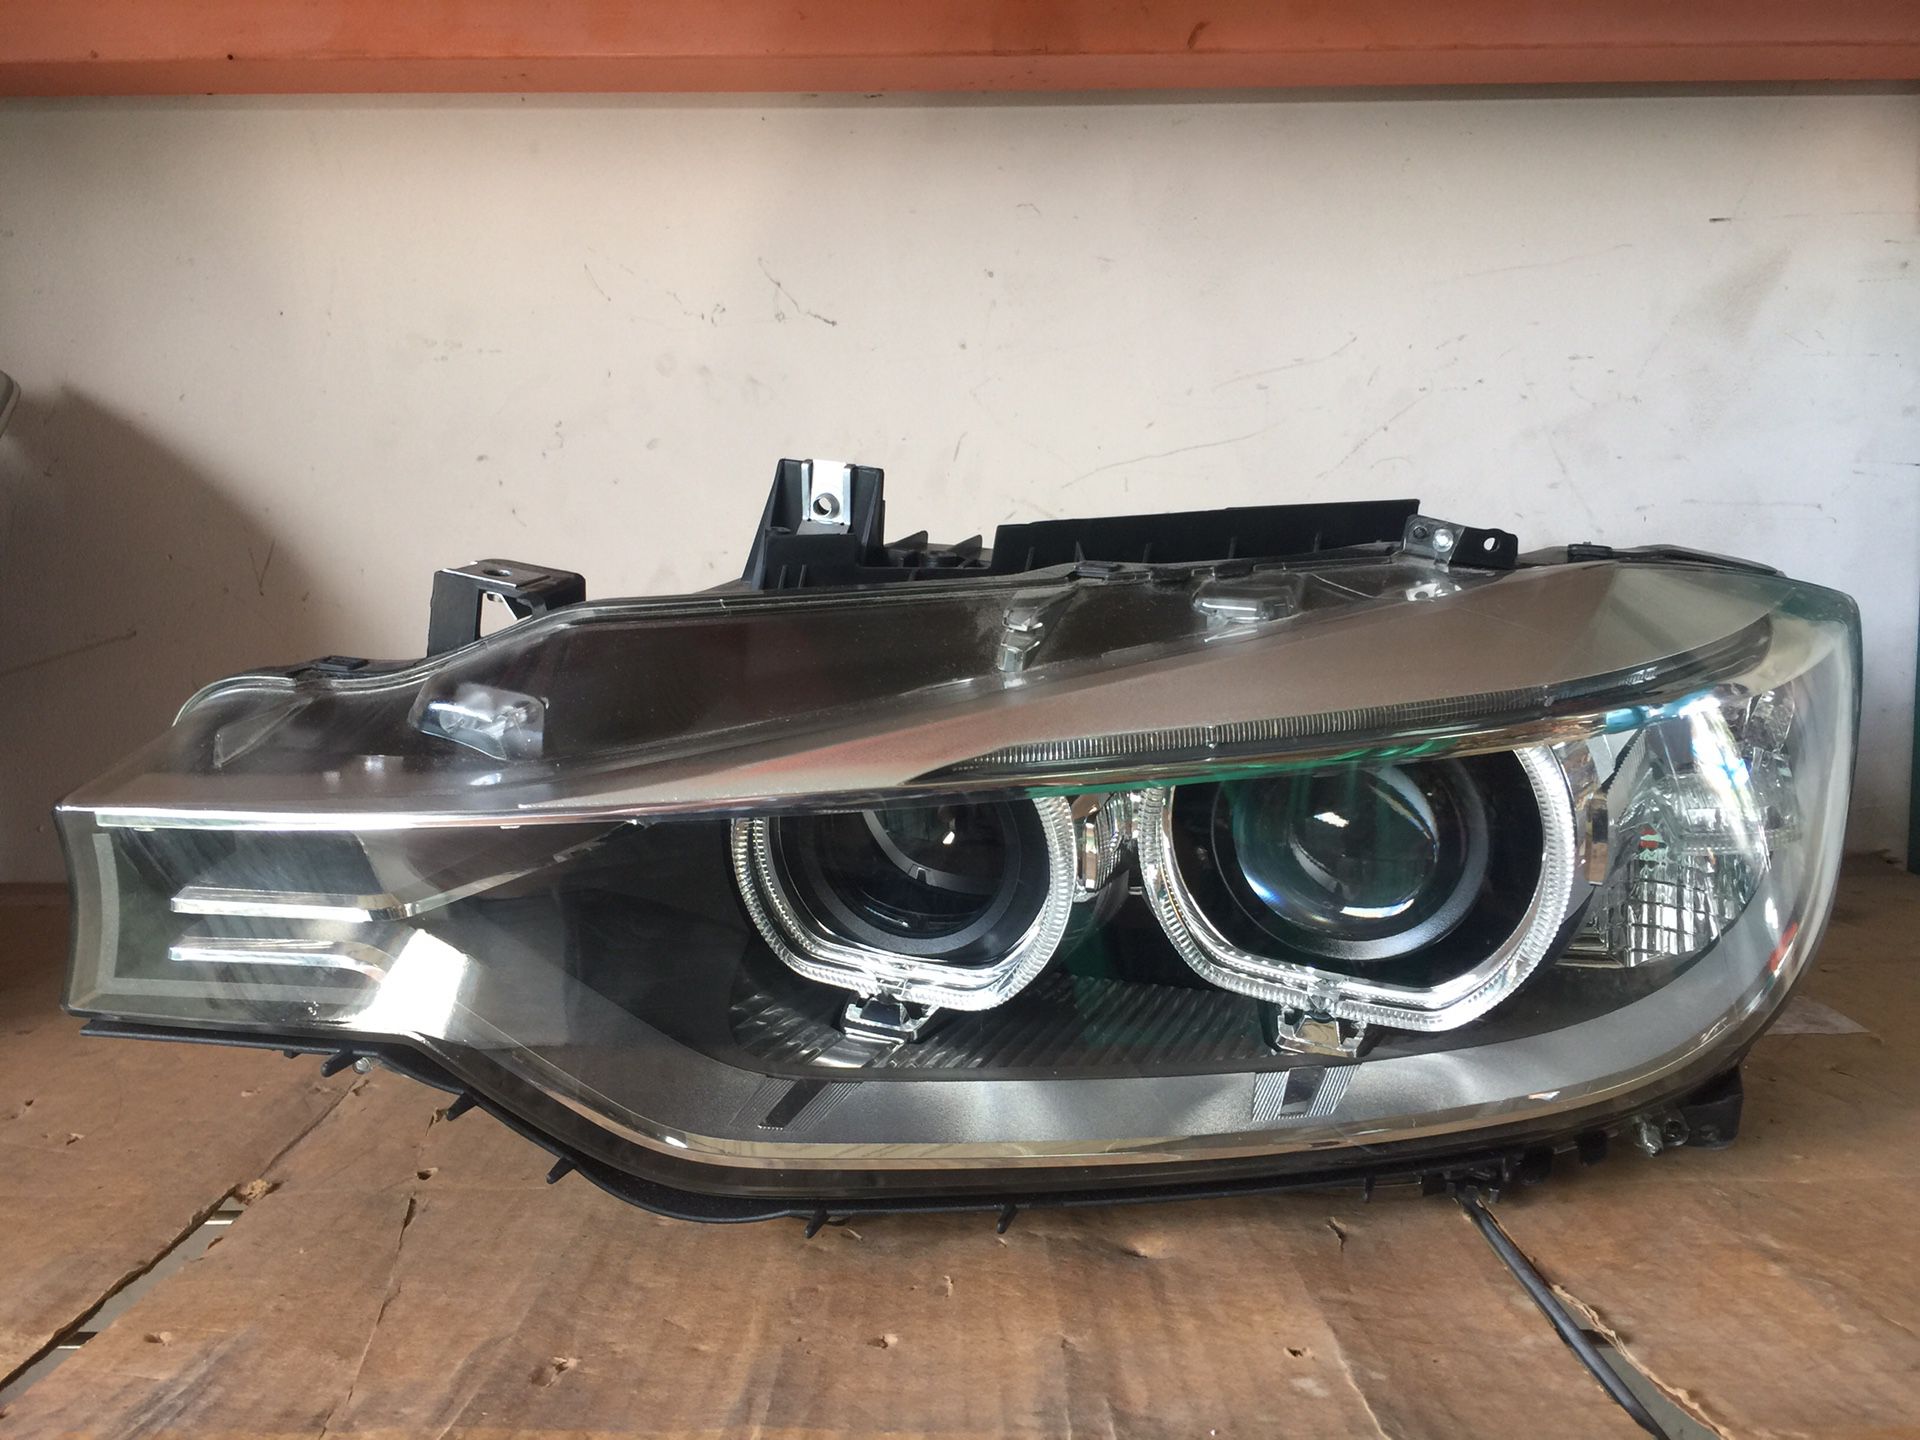 BMW 328i FRONT LEFT DRIVER SIDE XENON HEADLIGHT ASSEMBLY